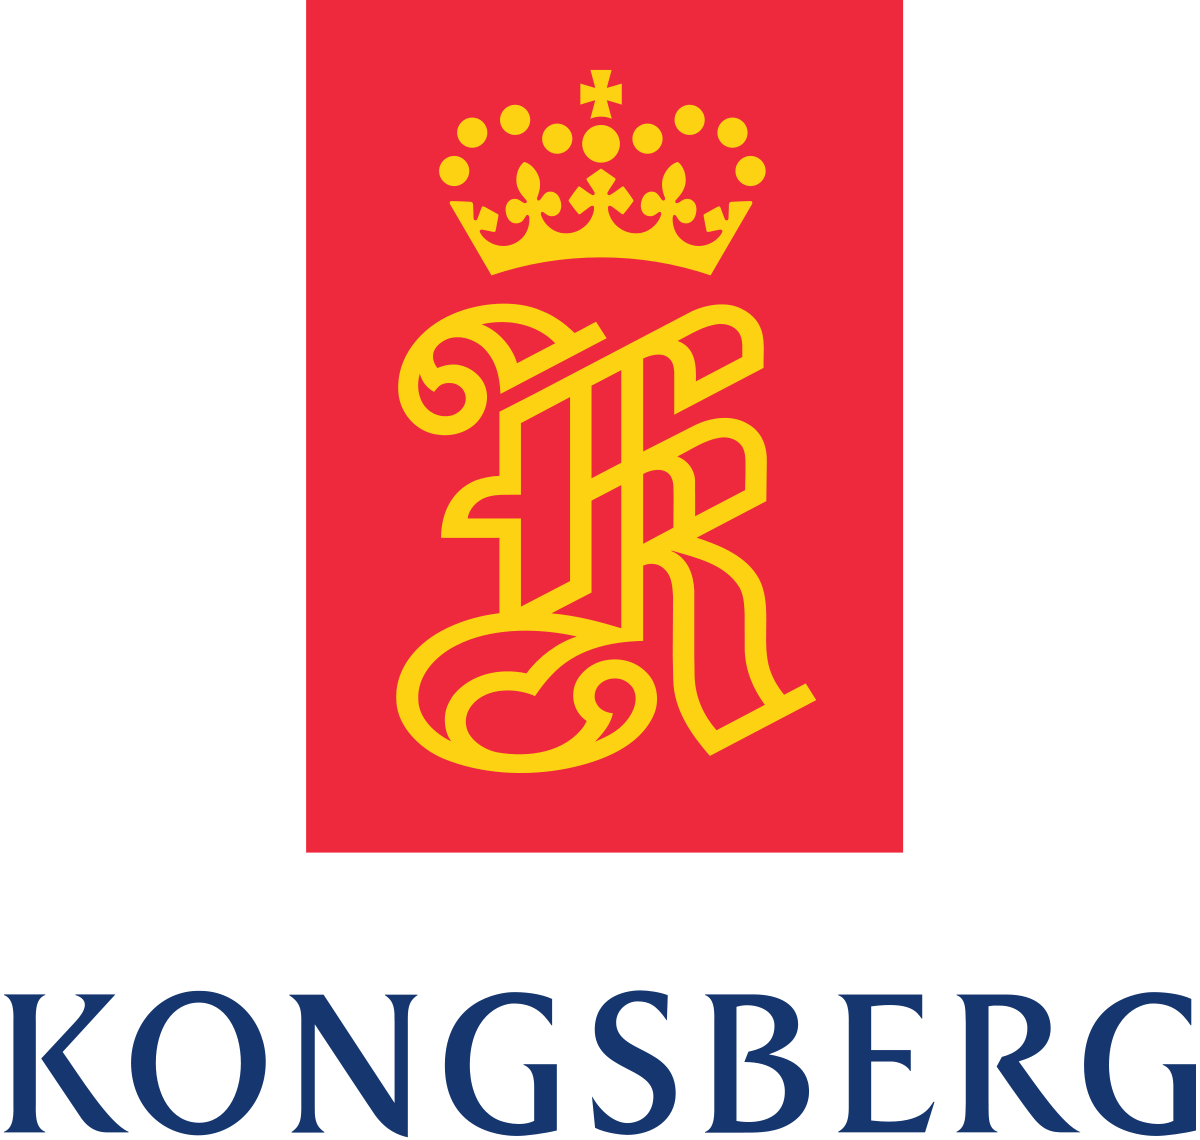 Link to the Kongsberg Group's website